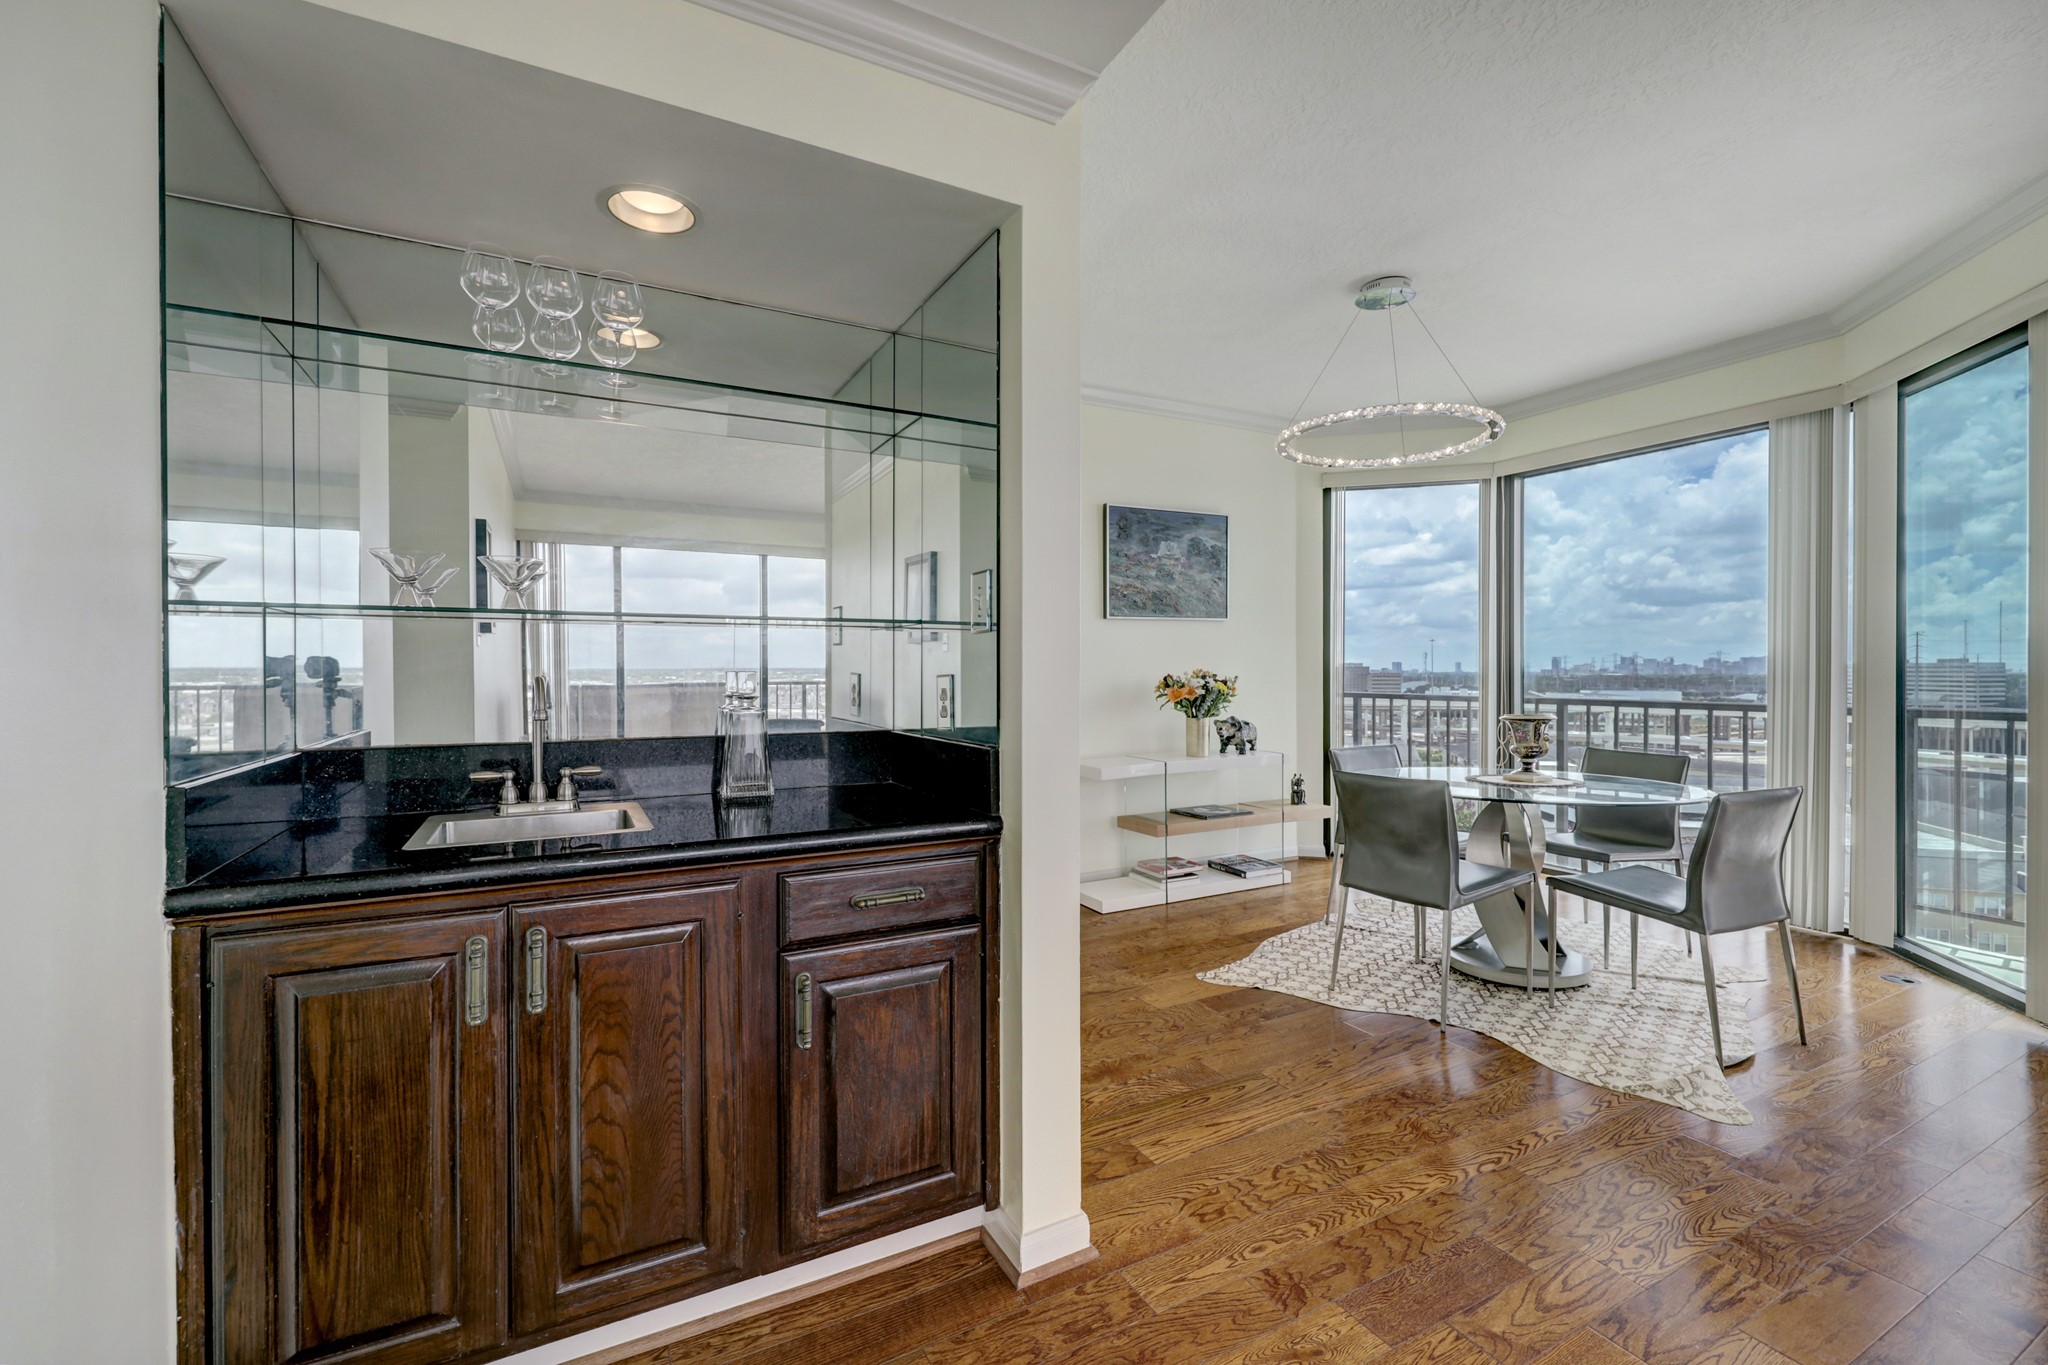 The wet bar is conveniently located between the living room and dining room and provides entertaining ease.